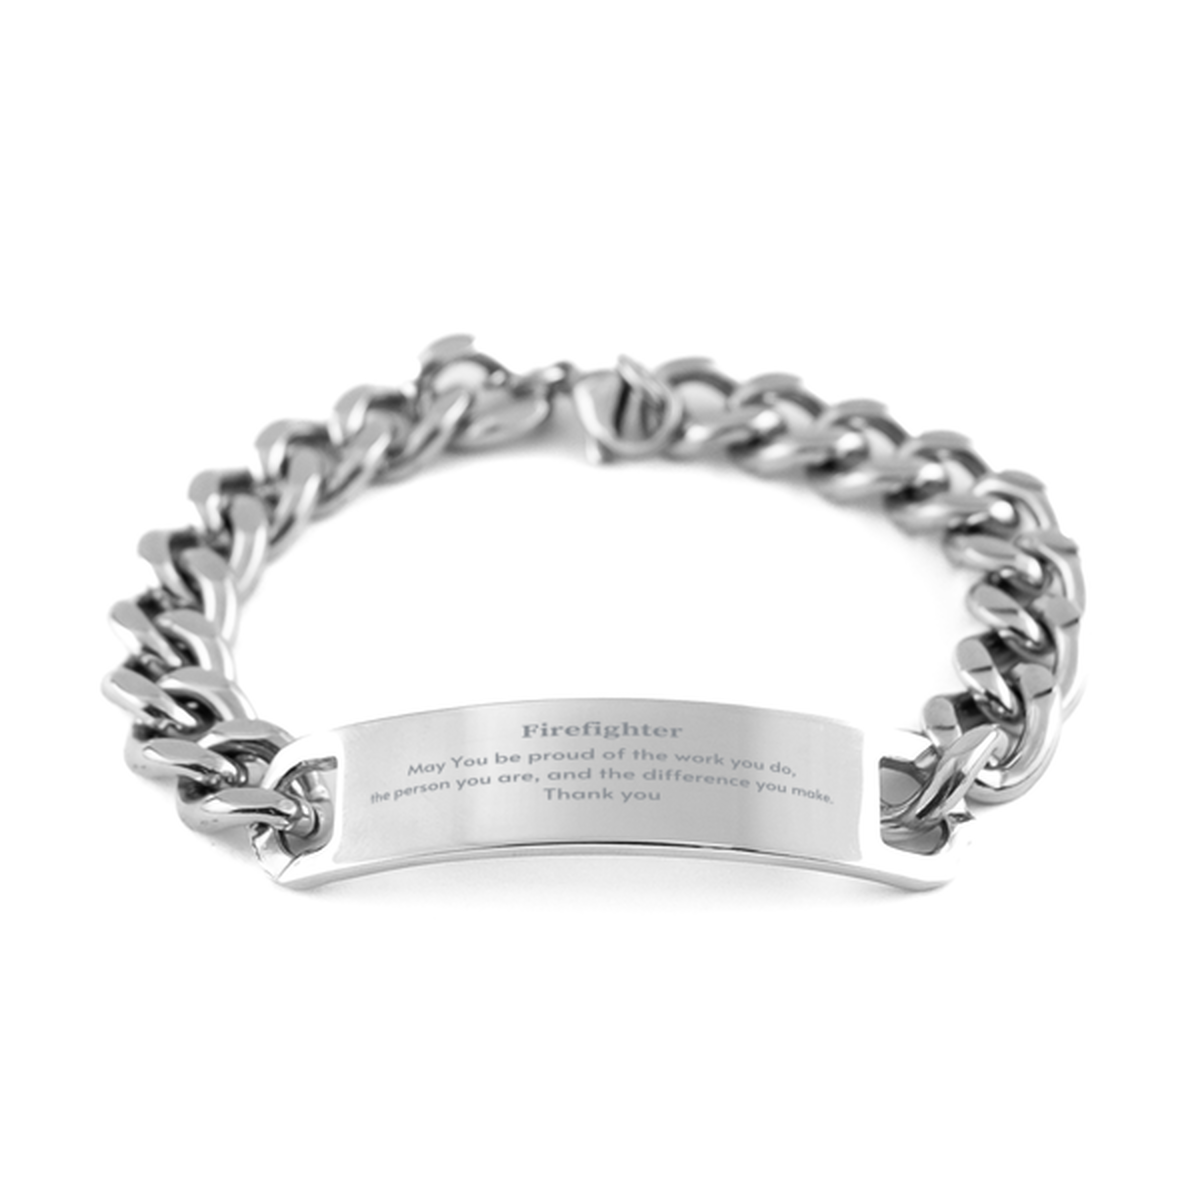 Heartwarming Cuban Chain Stainless Steel Bracelet Retirement Coworkers Gifts for Firefighter, Firefighter May You be proud of the work you do, the person you are Gifts for Boss Men Women Friends